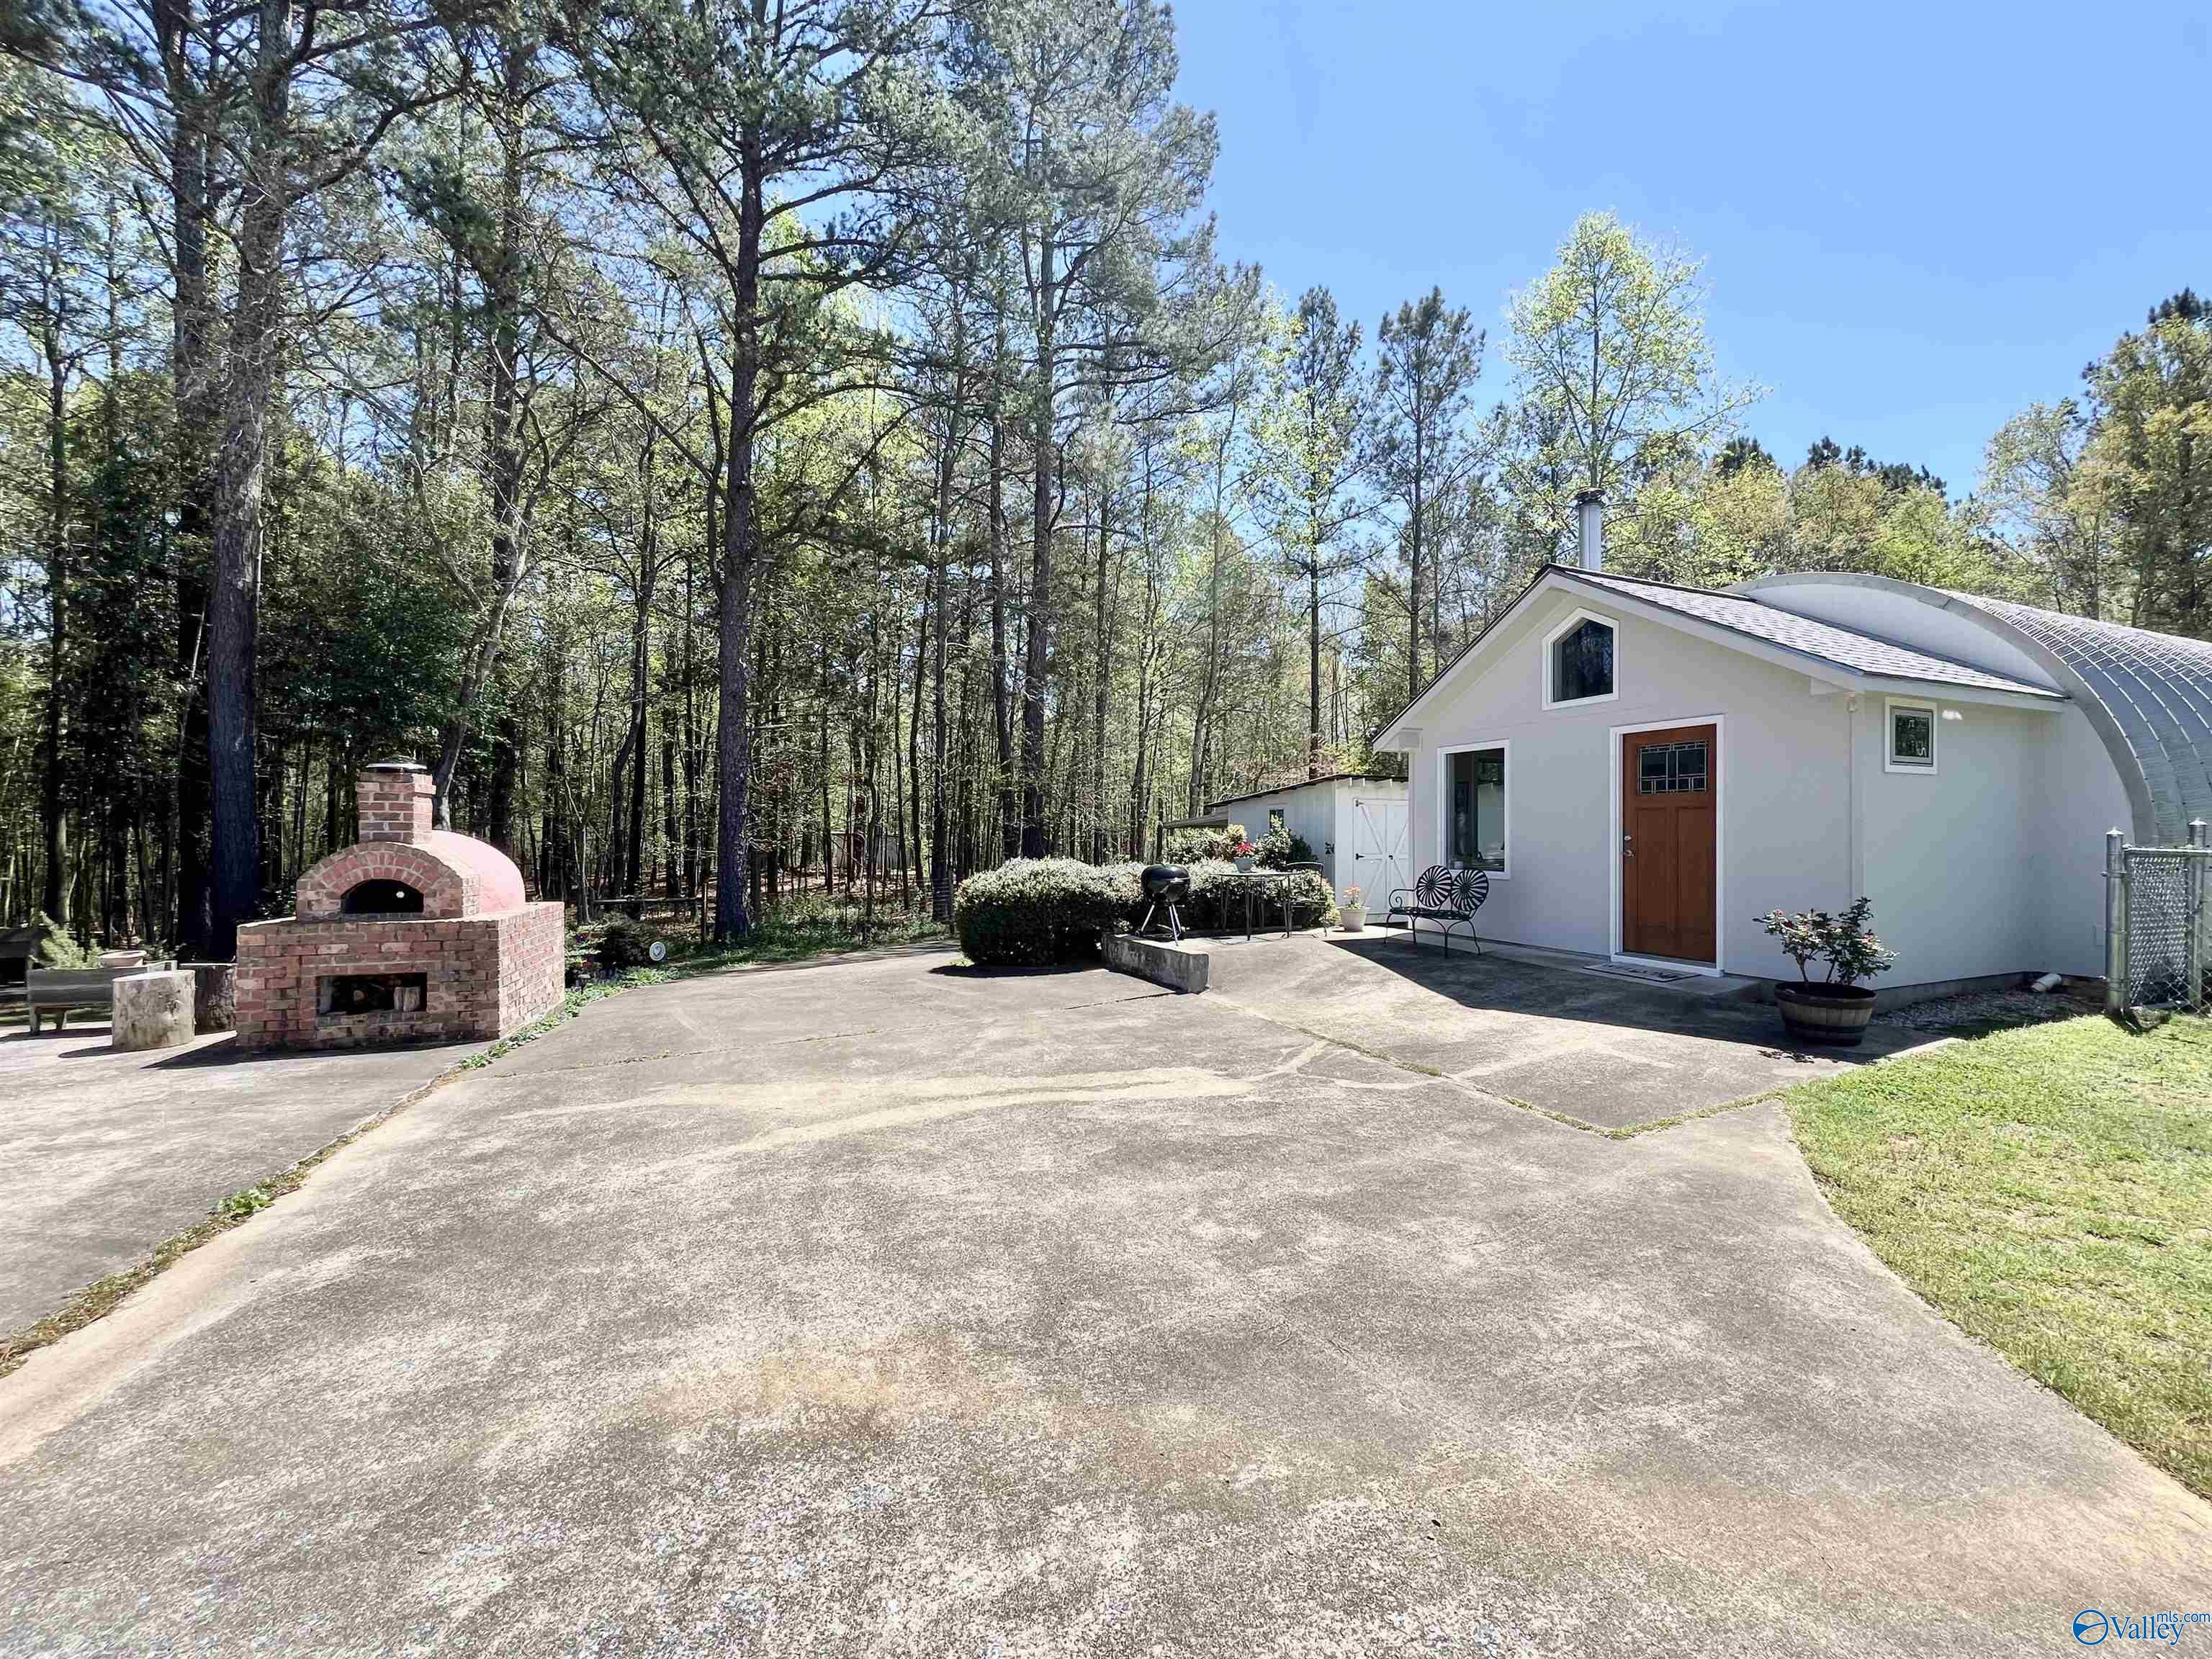 Property: 740 Youngs Mill Road,Lineville, AL